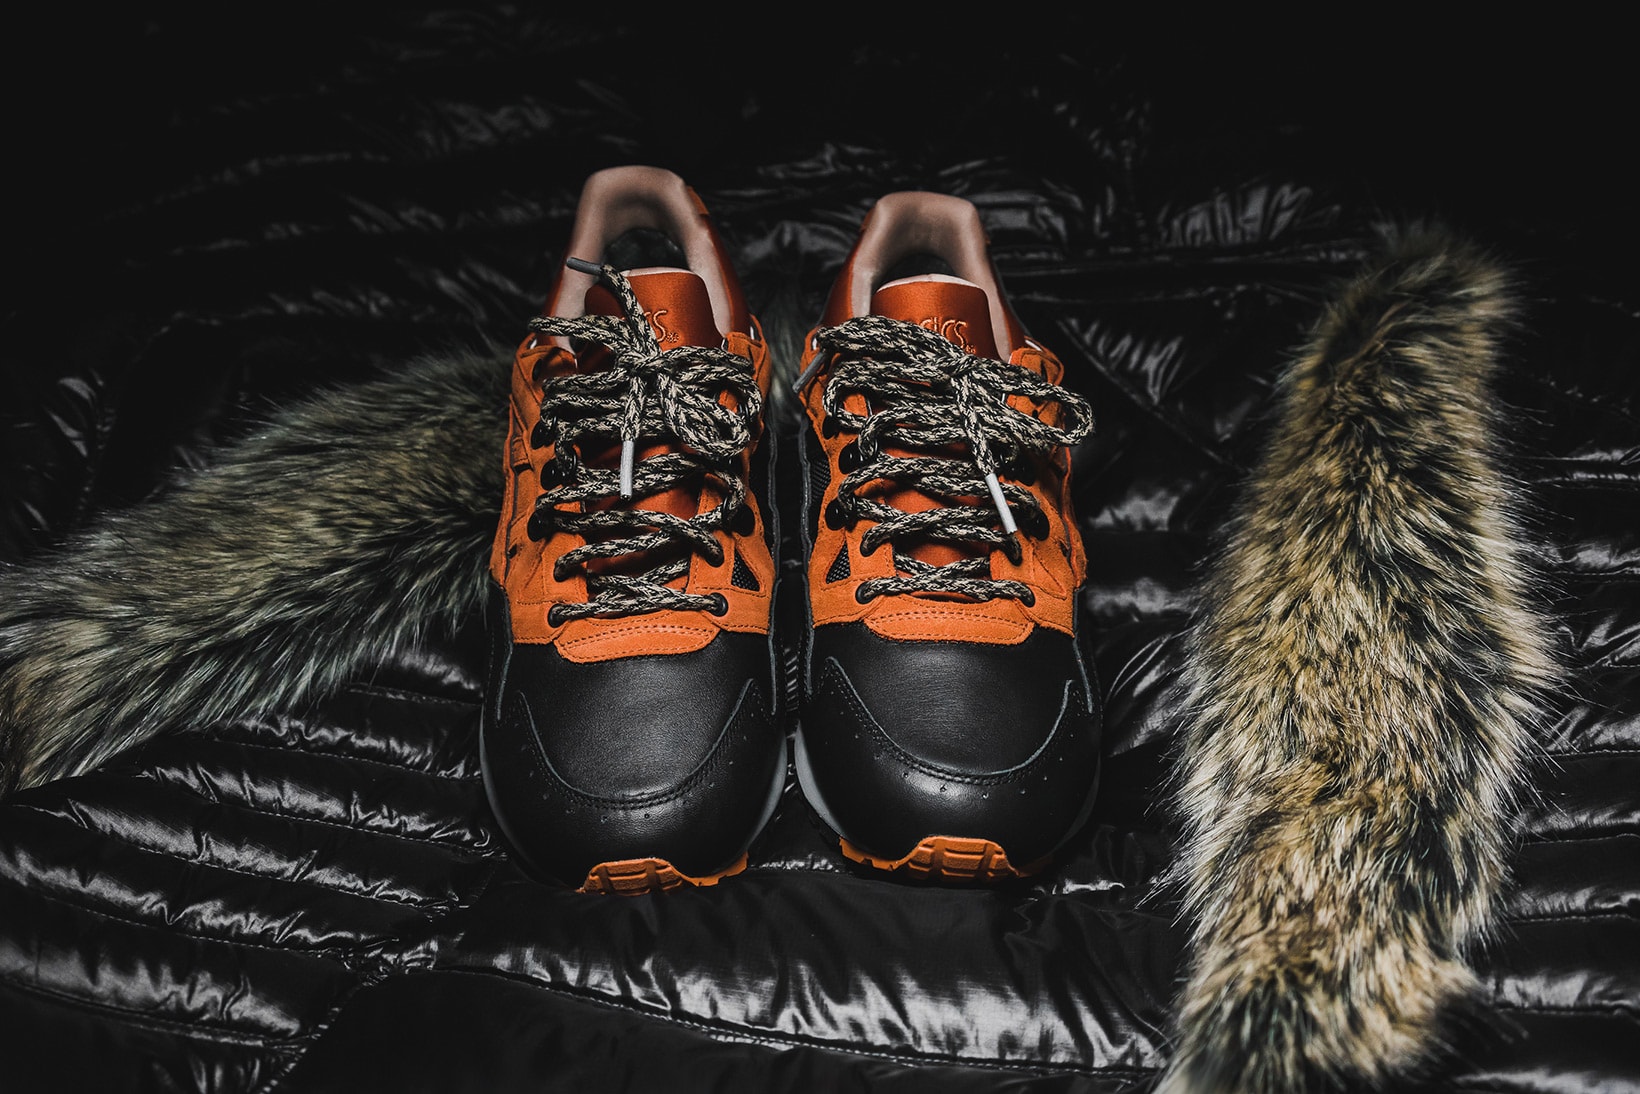 Packer Shoes ASICS Tiger New Era Scary Cold Collaboration